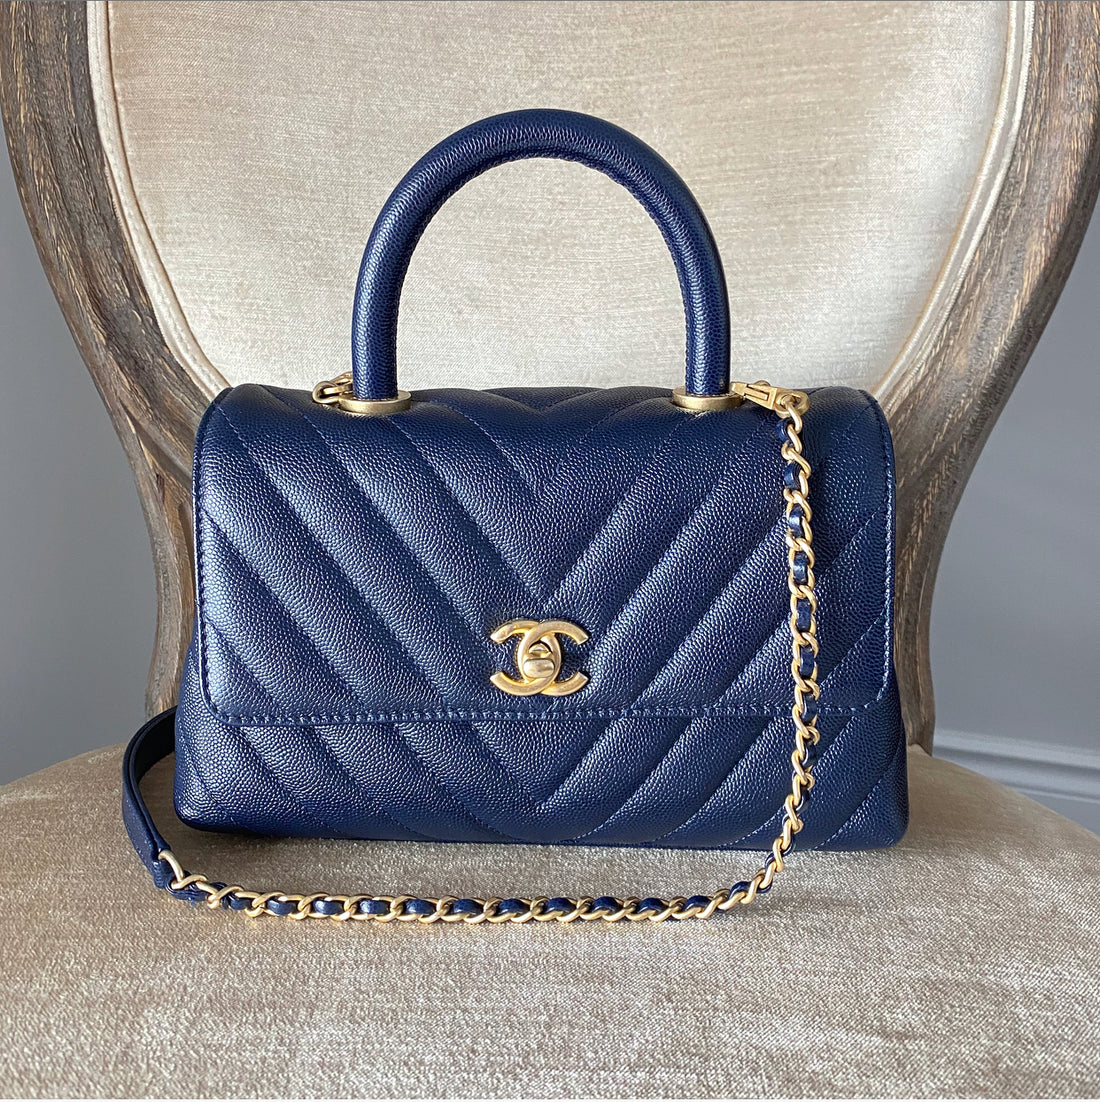 Chanel coco handle in small/medium in chevron navy with black